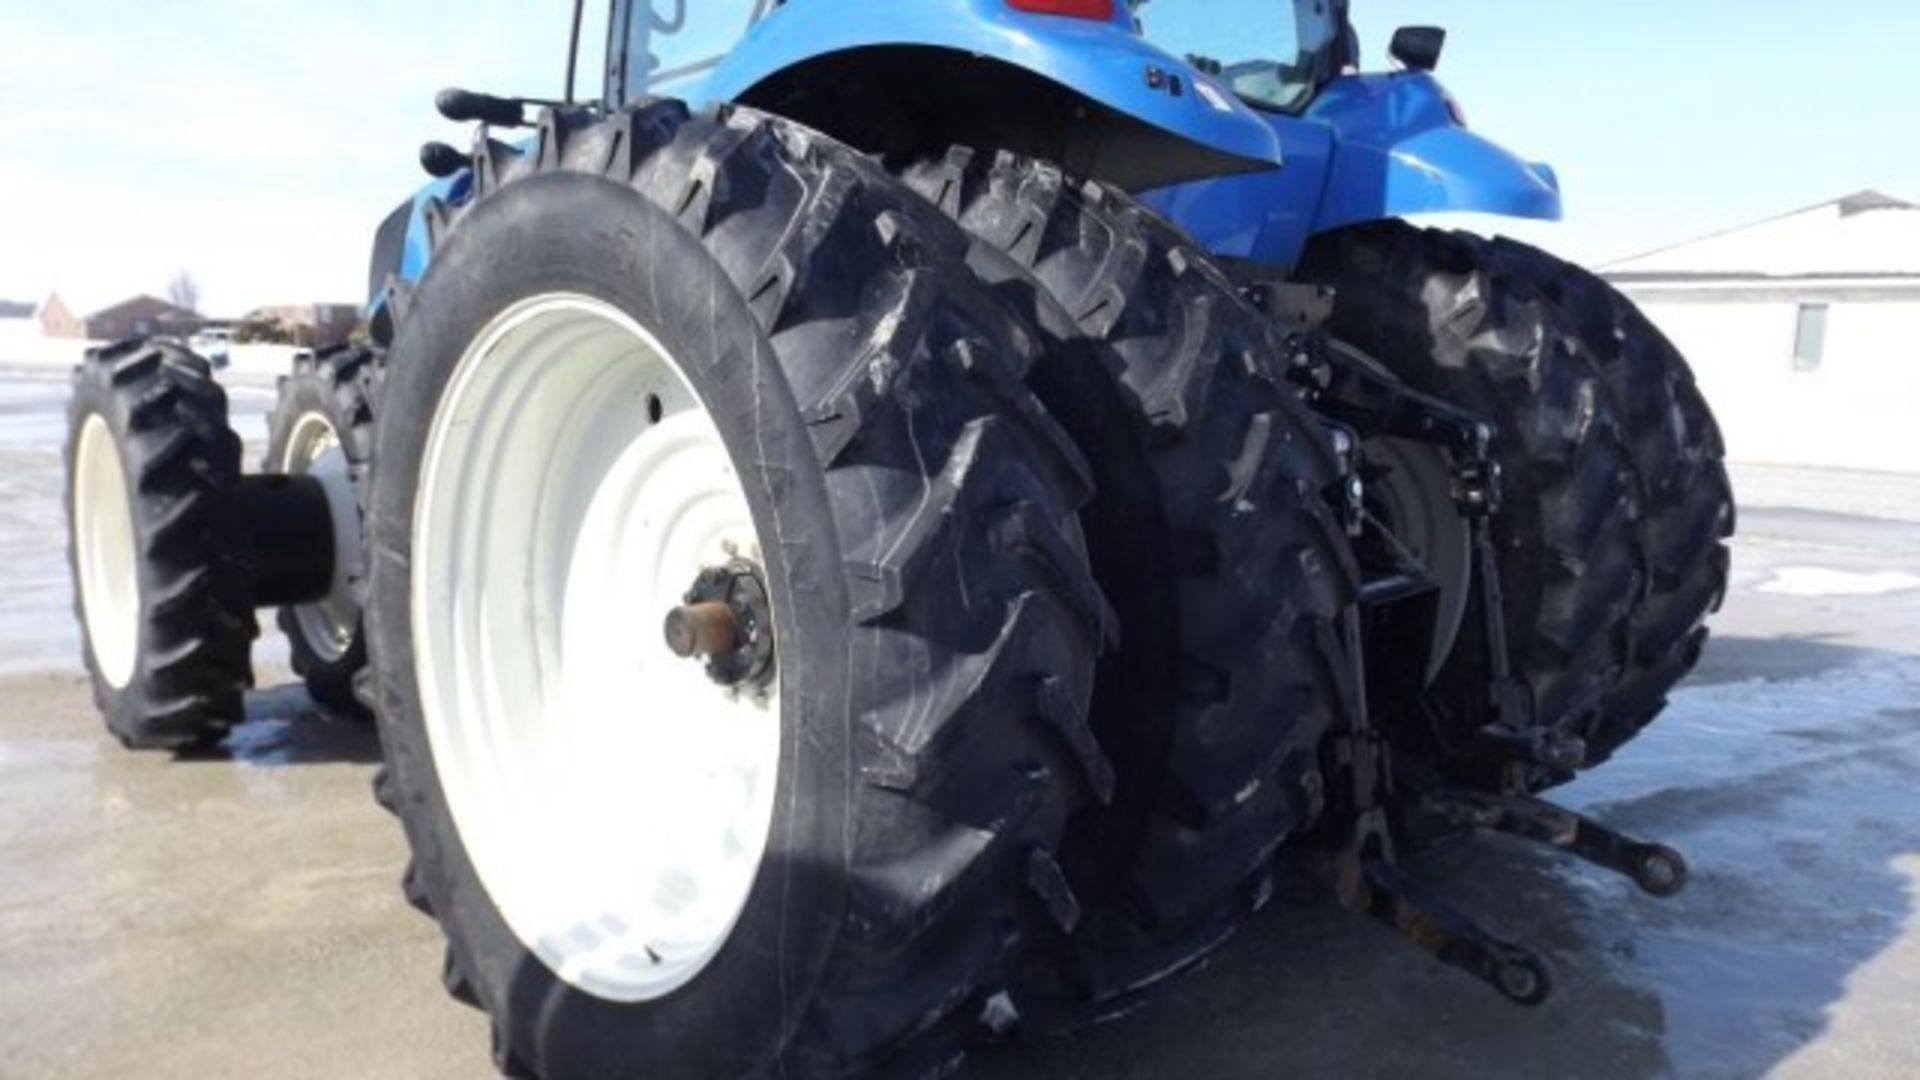 New Holland T8.330 Tractor '12, sn#ZBRC08592 1192 Hrs, MFWD, Deluxe Cab, Buddy Seat, 280 HP, 18/4 - Image 7 of 19